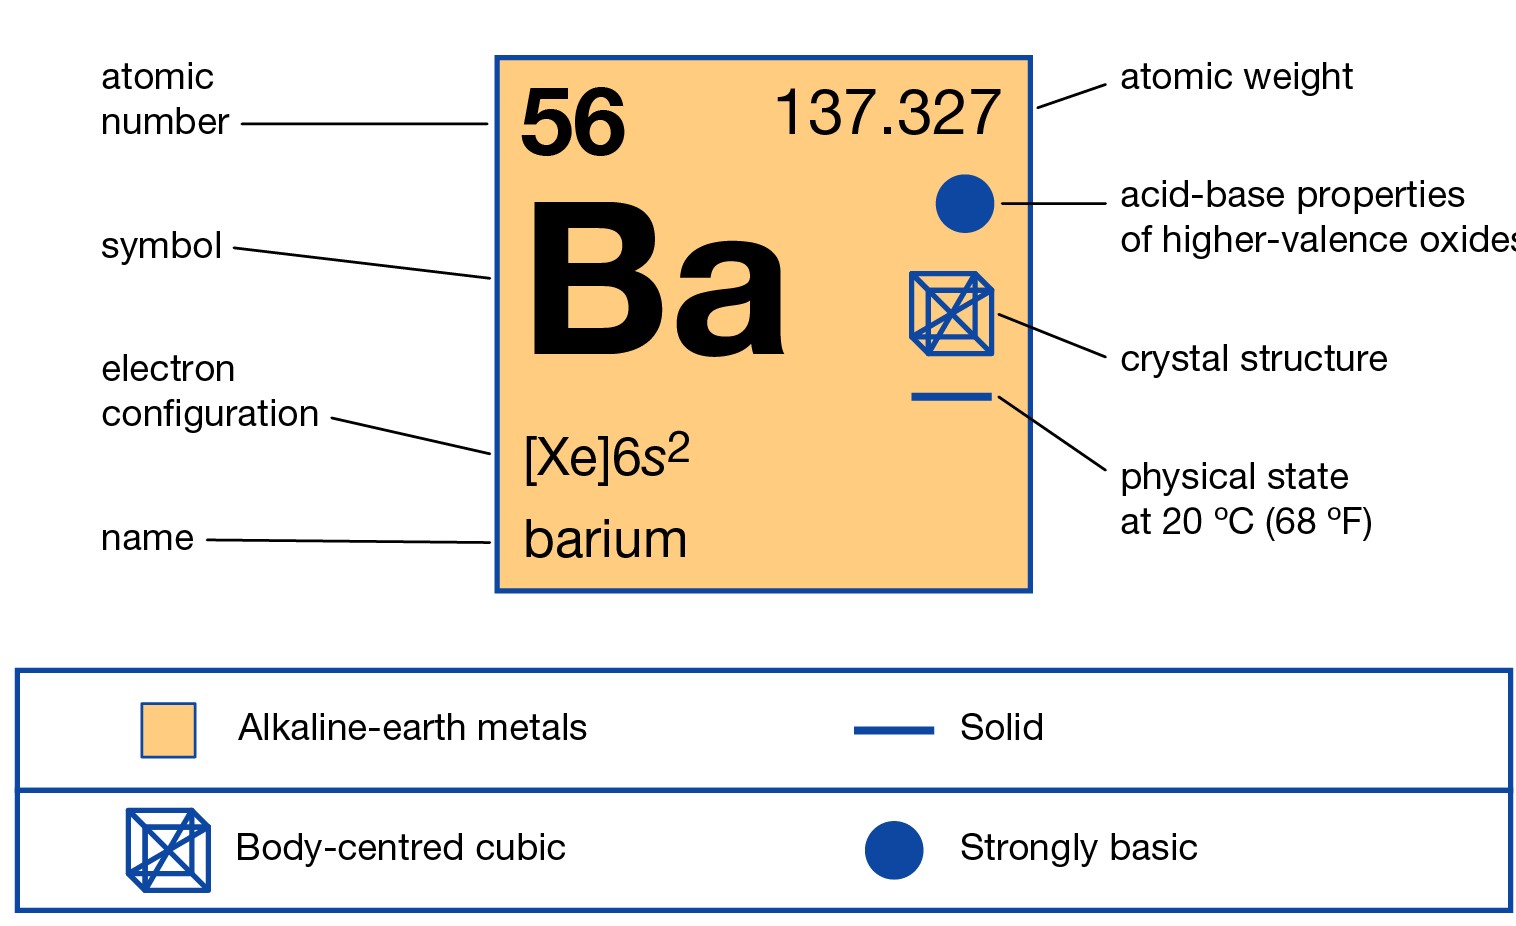 How many valence electrons does Barium have?